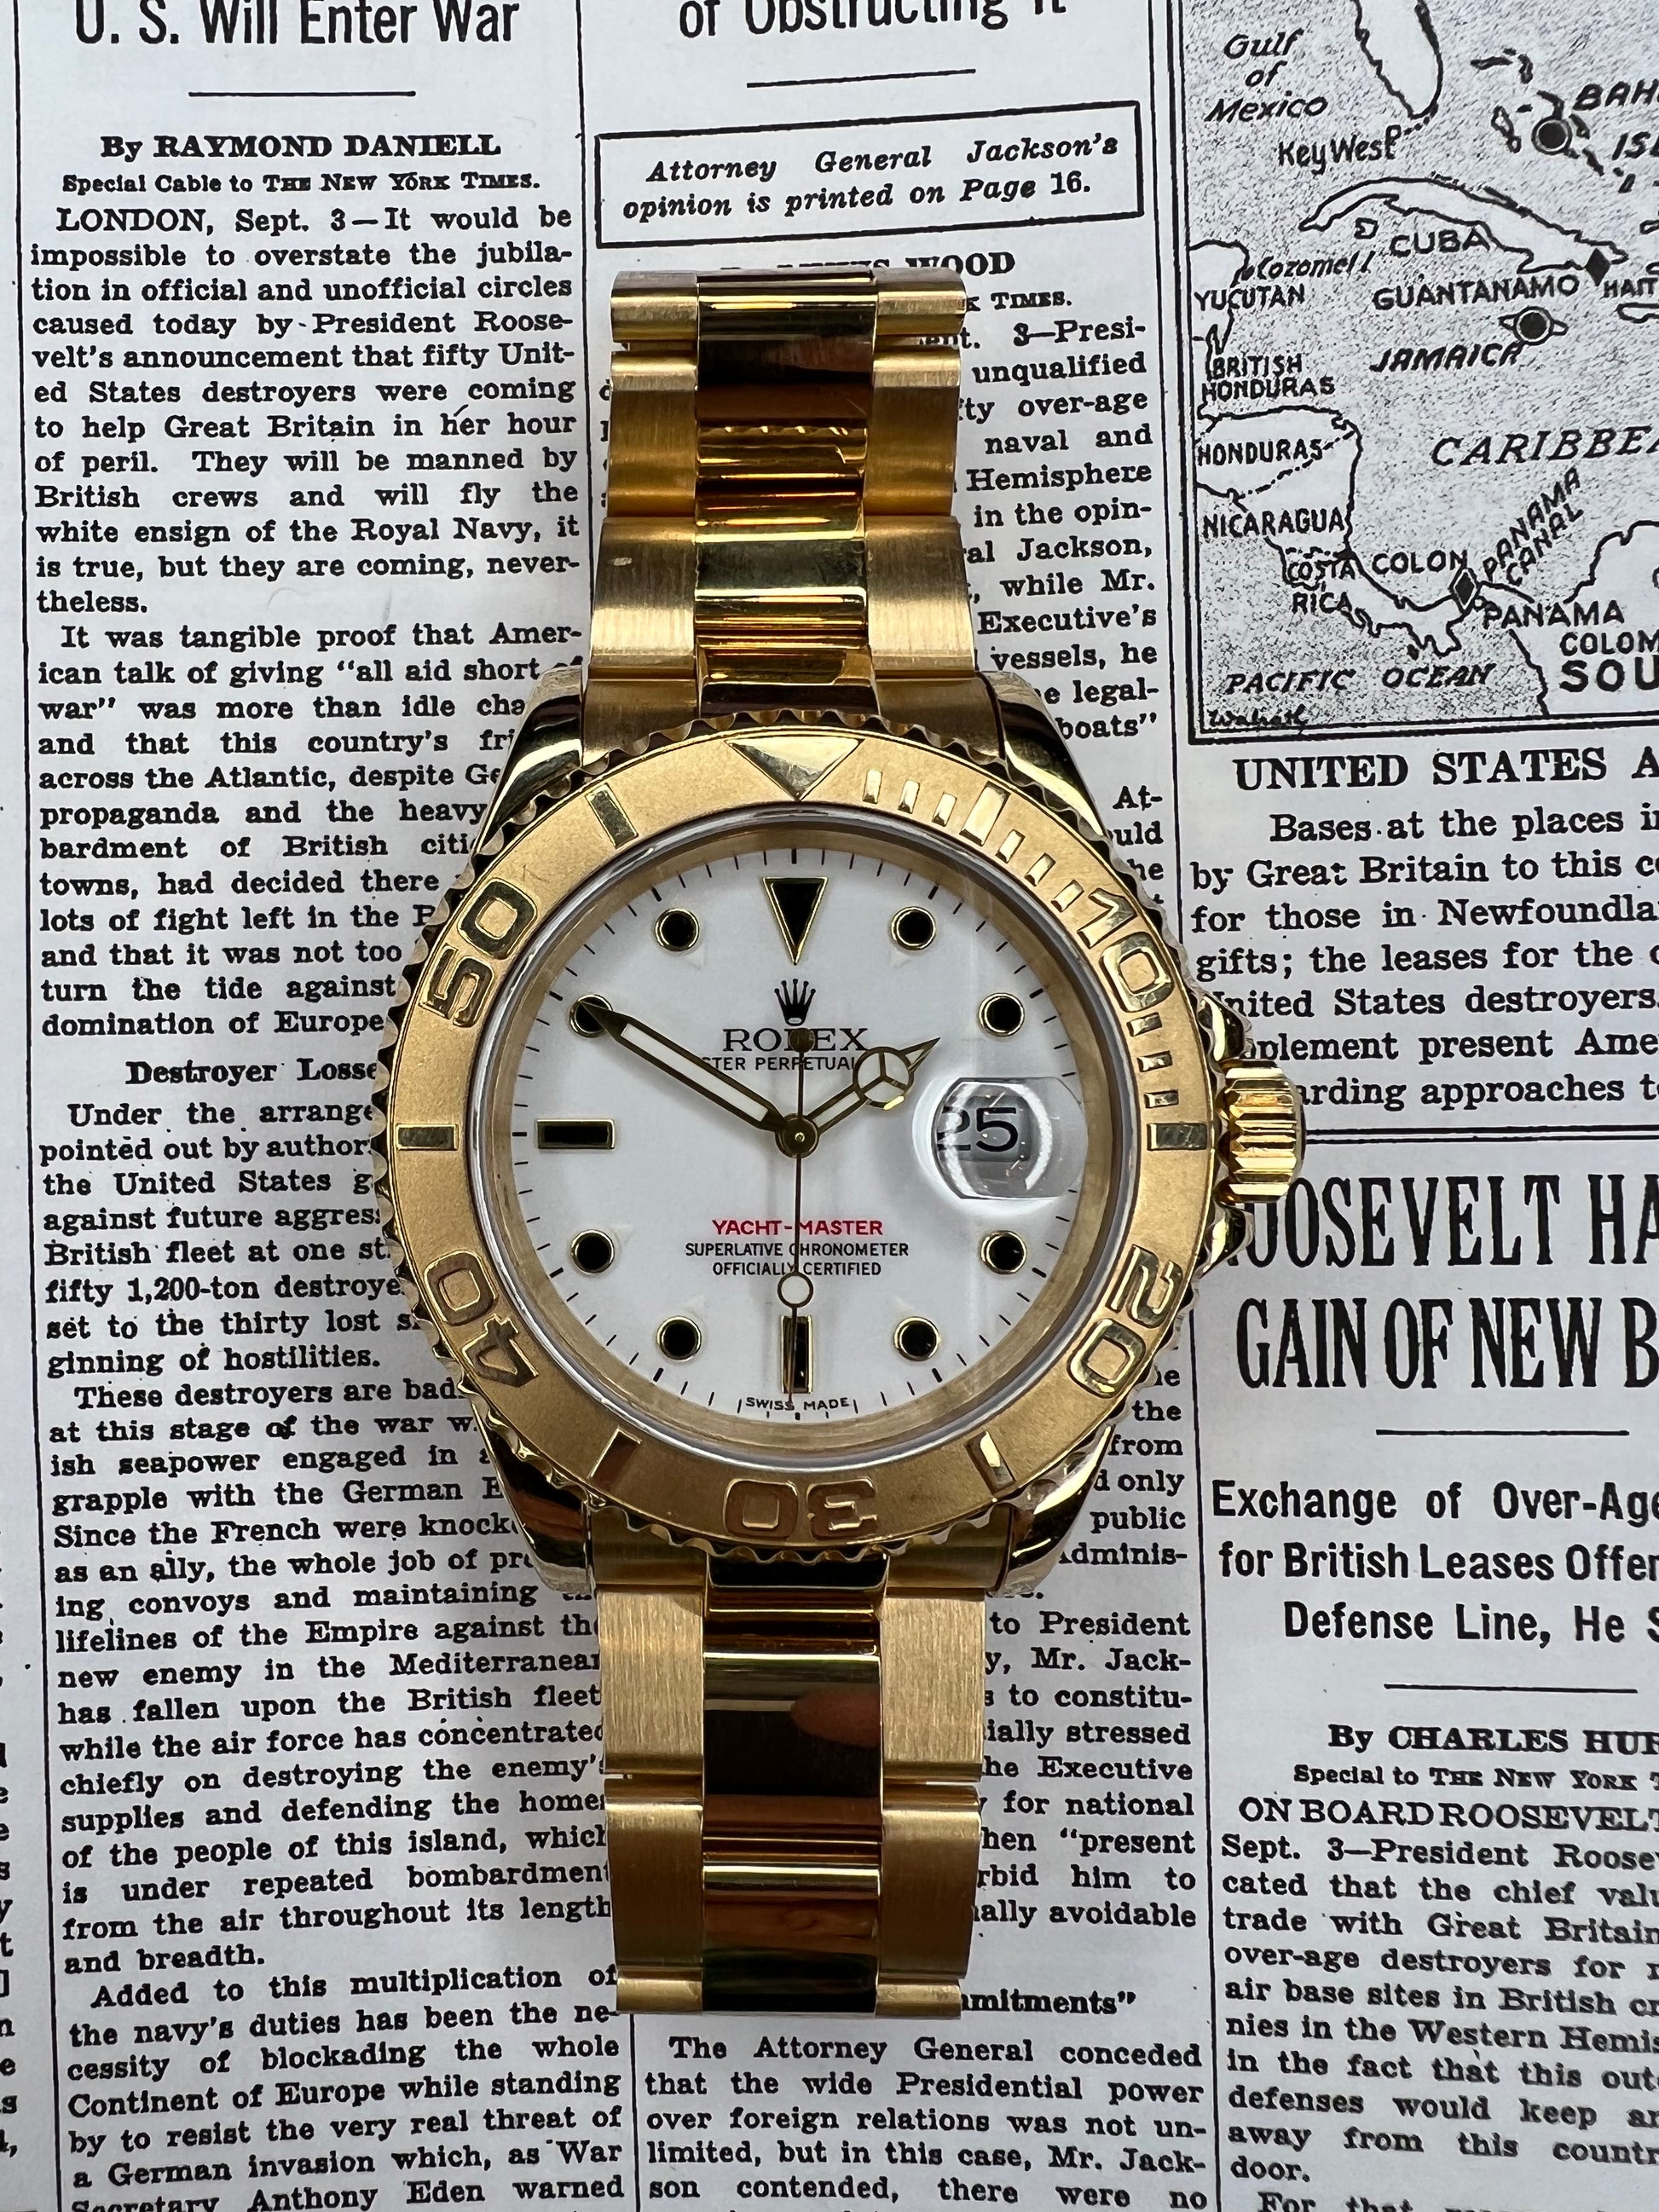 Vintage Rolex Yacht-Master White Dial 18K Yellow Gold Watch